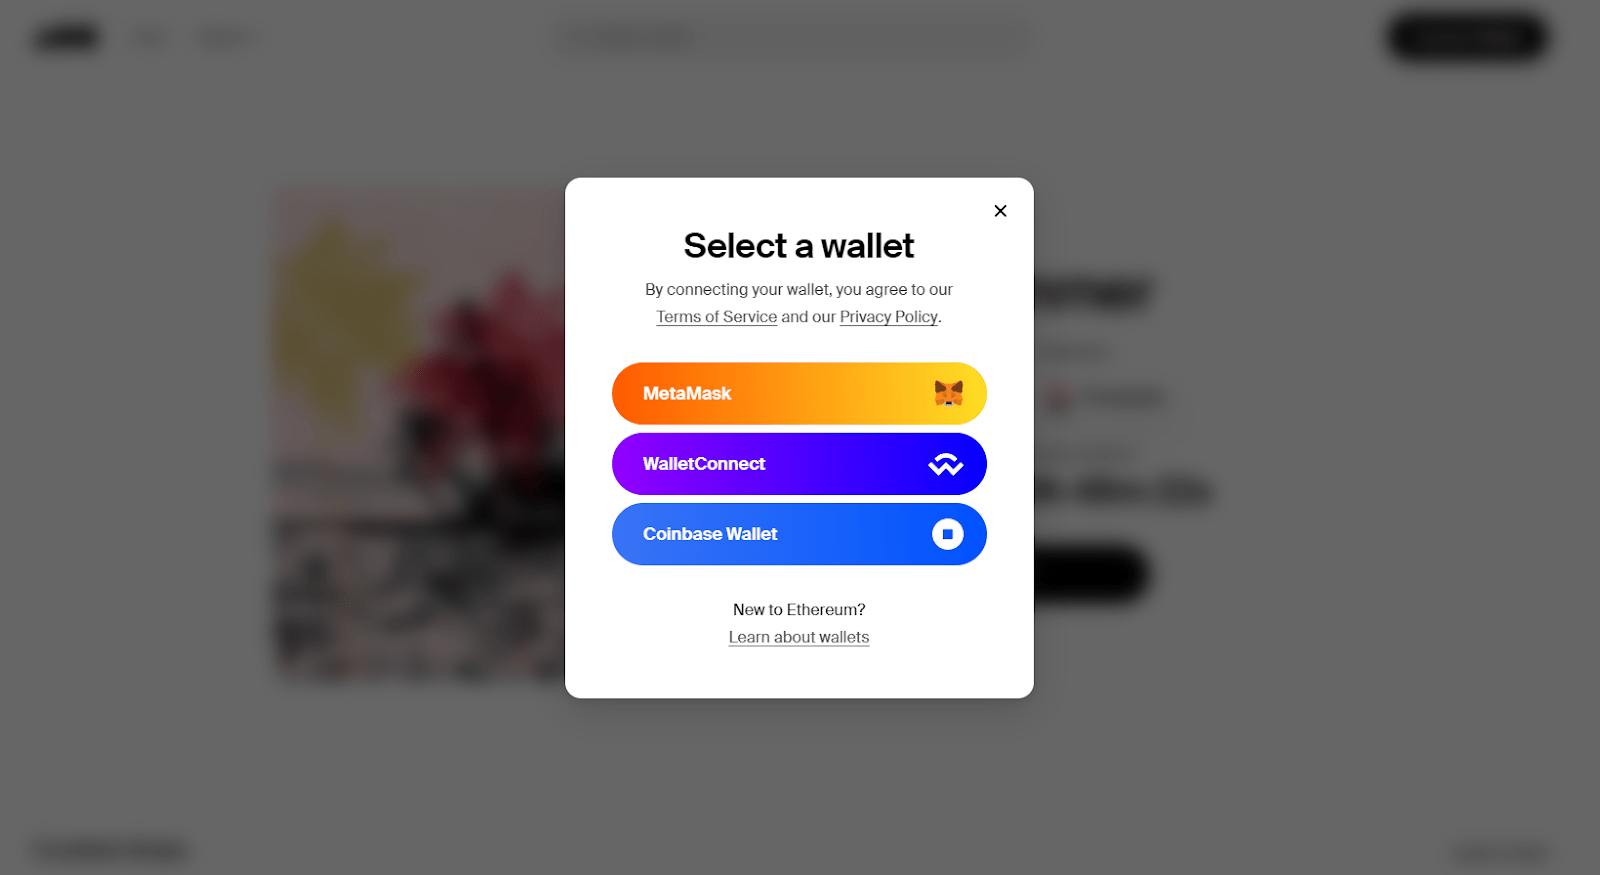 Screenshot of the wallet select screen on Foundation app.